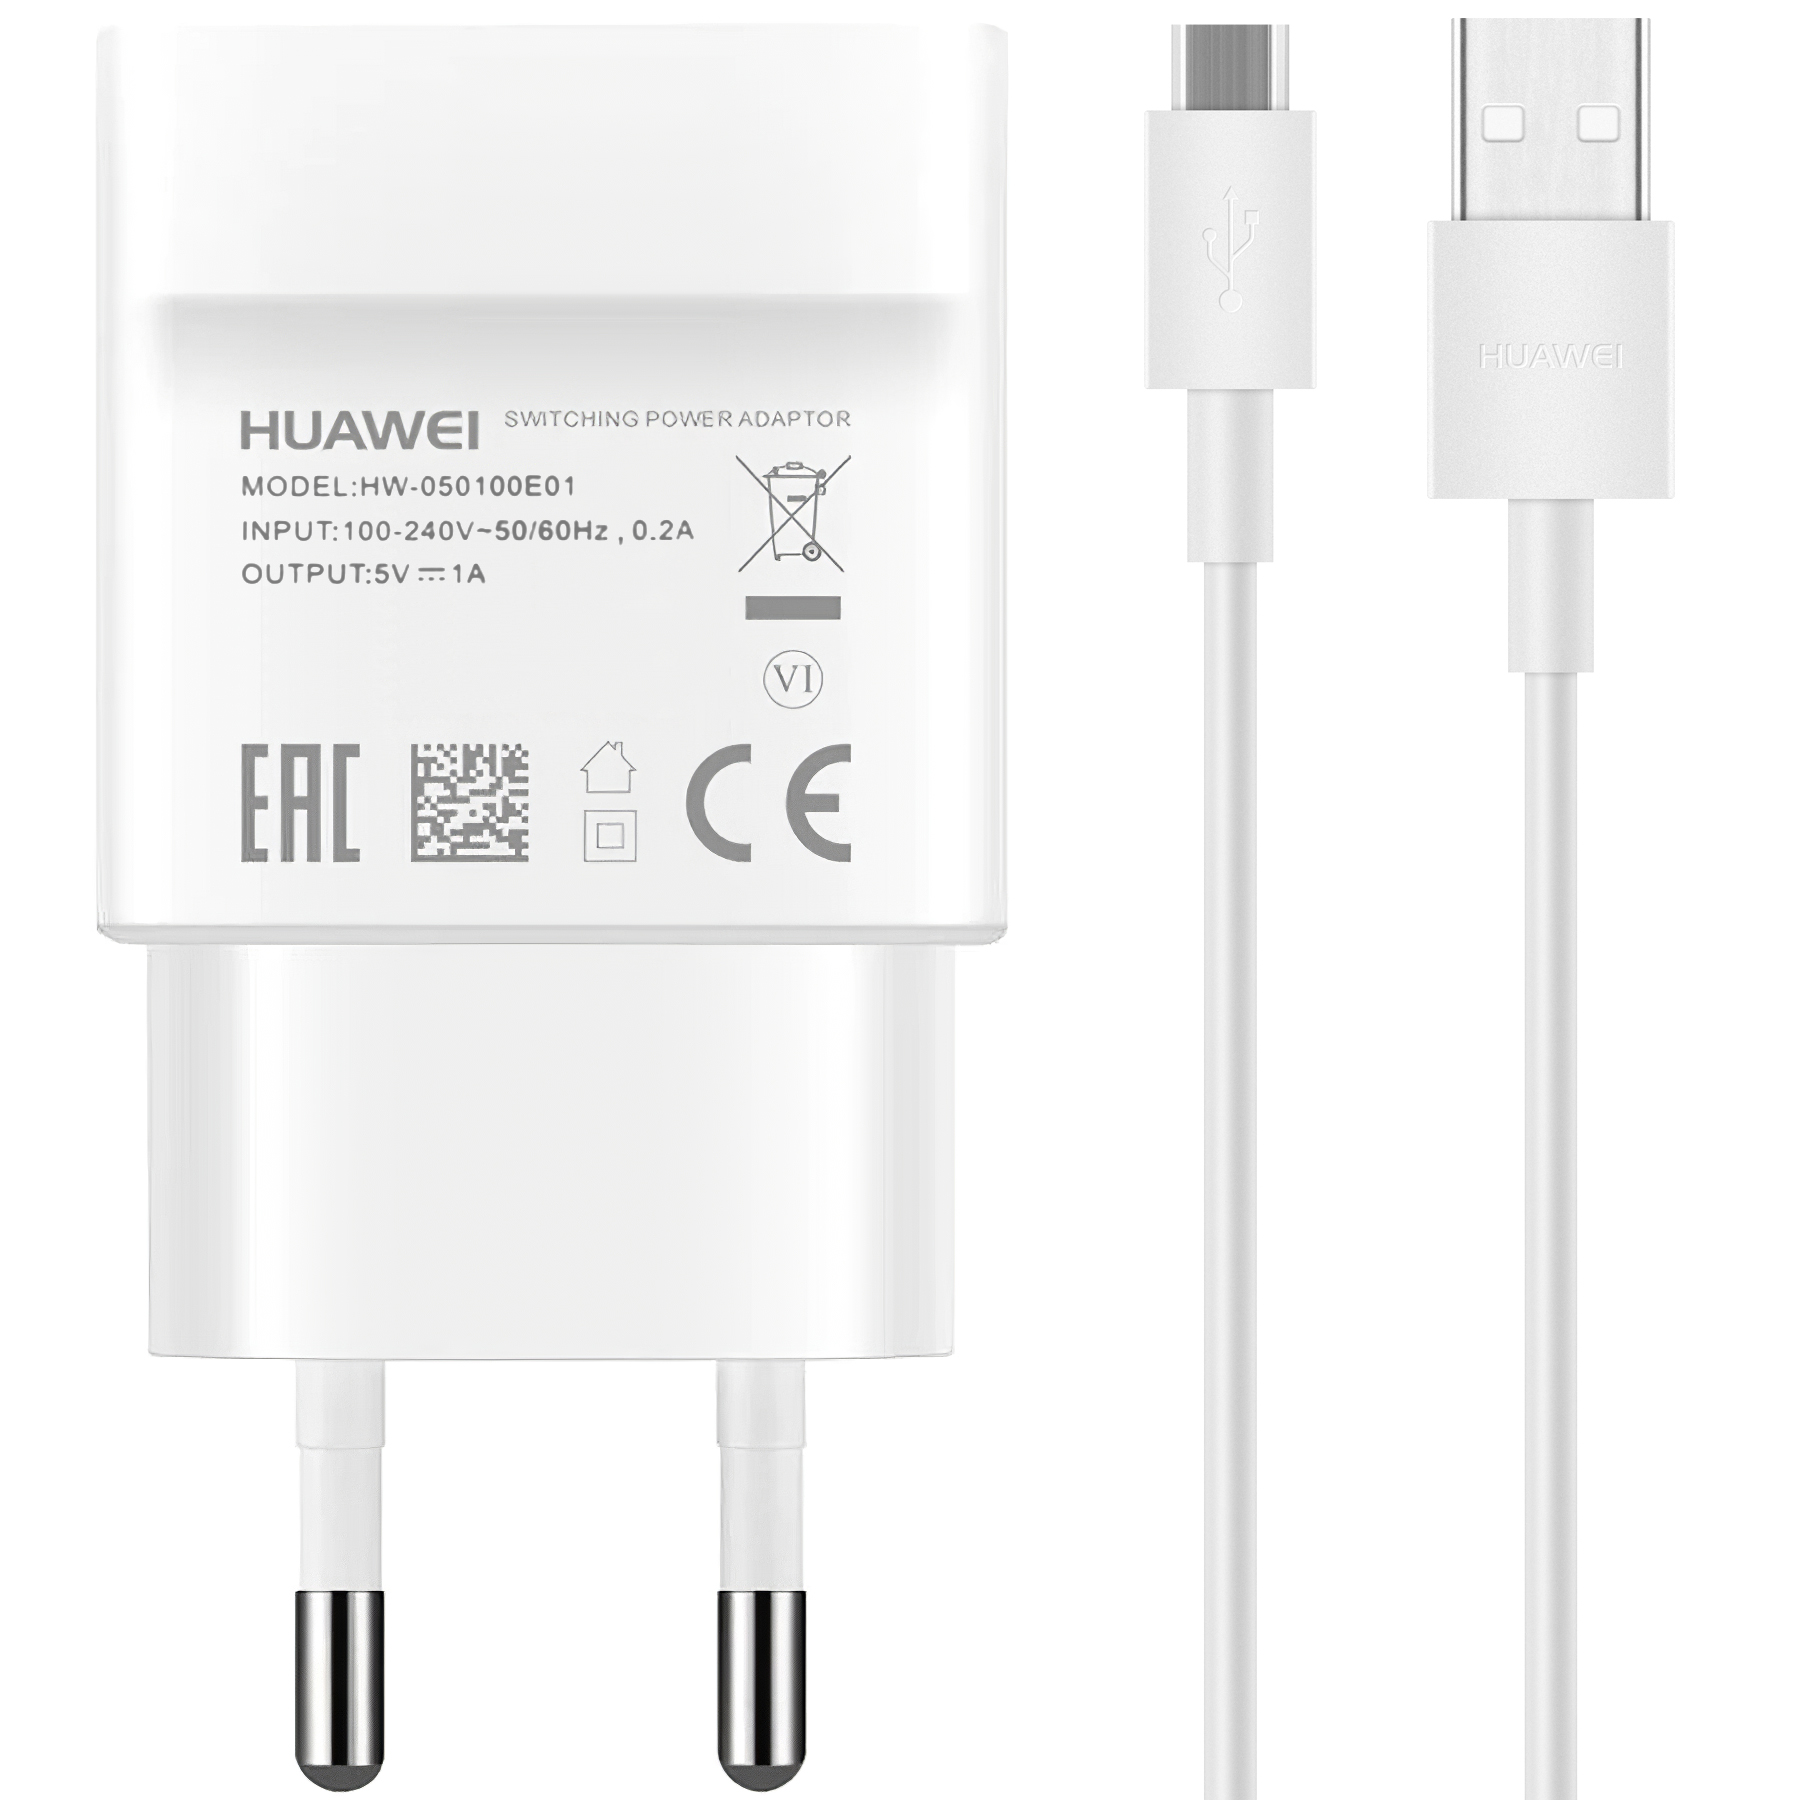 wall-charger-huawei-hw-050100e01-2C-1x-usb-with-microusb-cable-white--28bulk-29